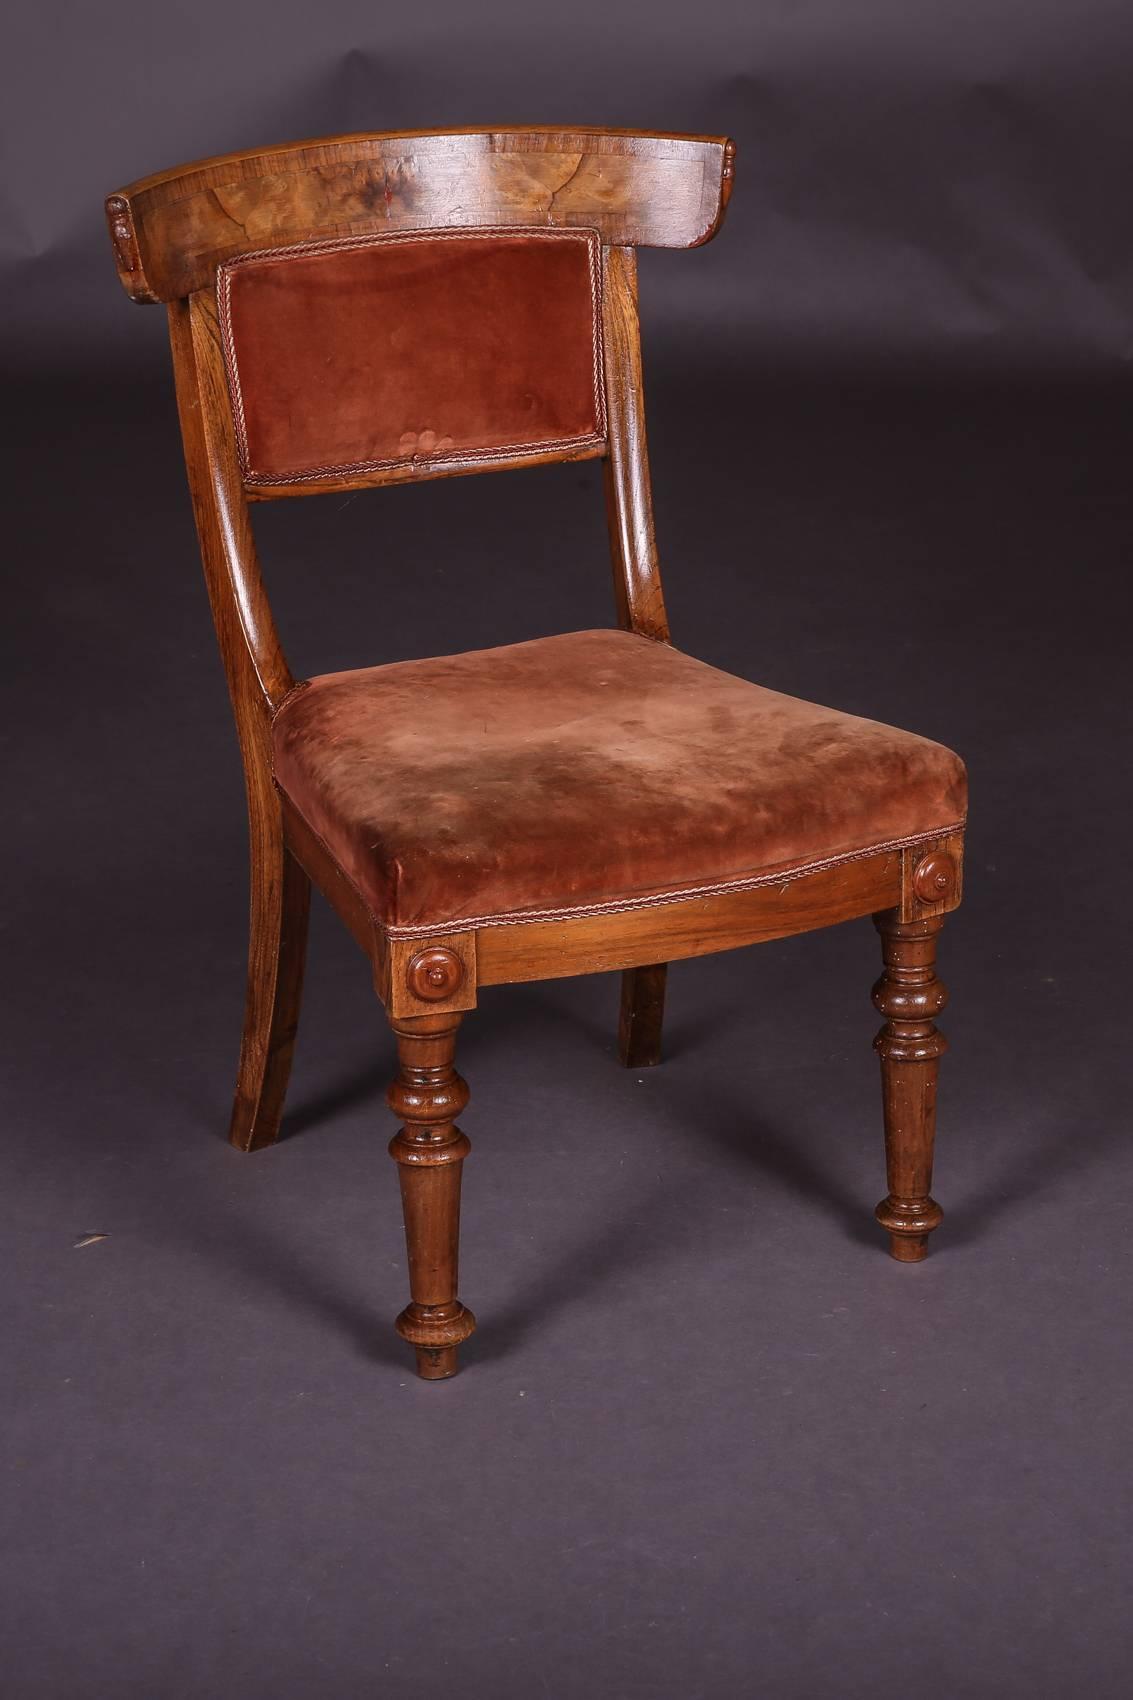 Biedermeier chair, circa 1845.
Solid wood with red cover. Rear legs saber-shaped. Wide curving backrest.

(C-127).